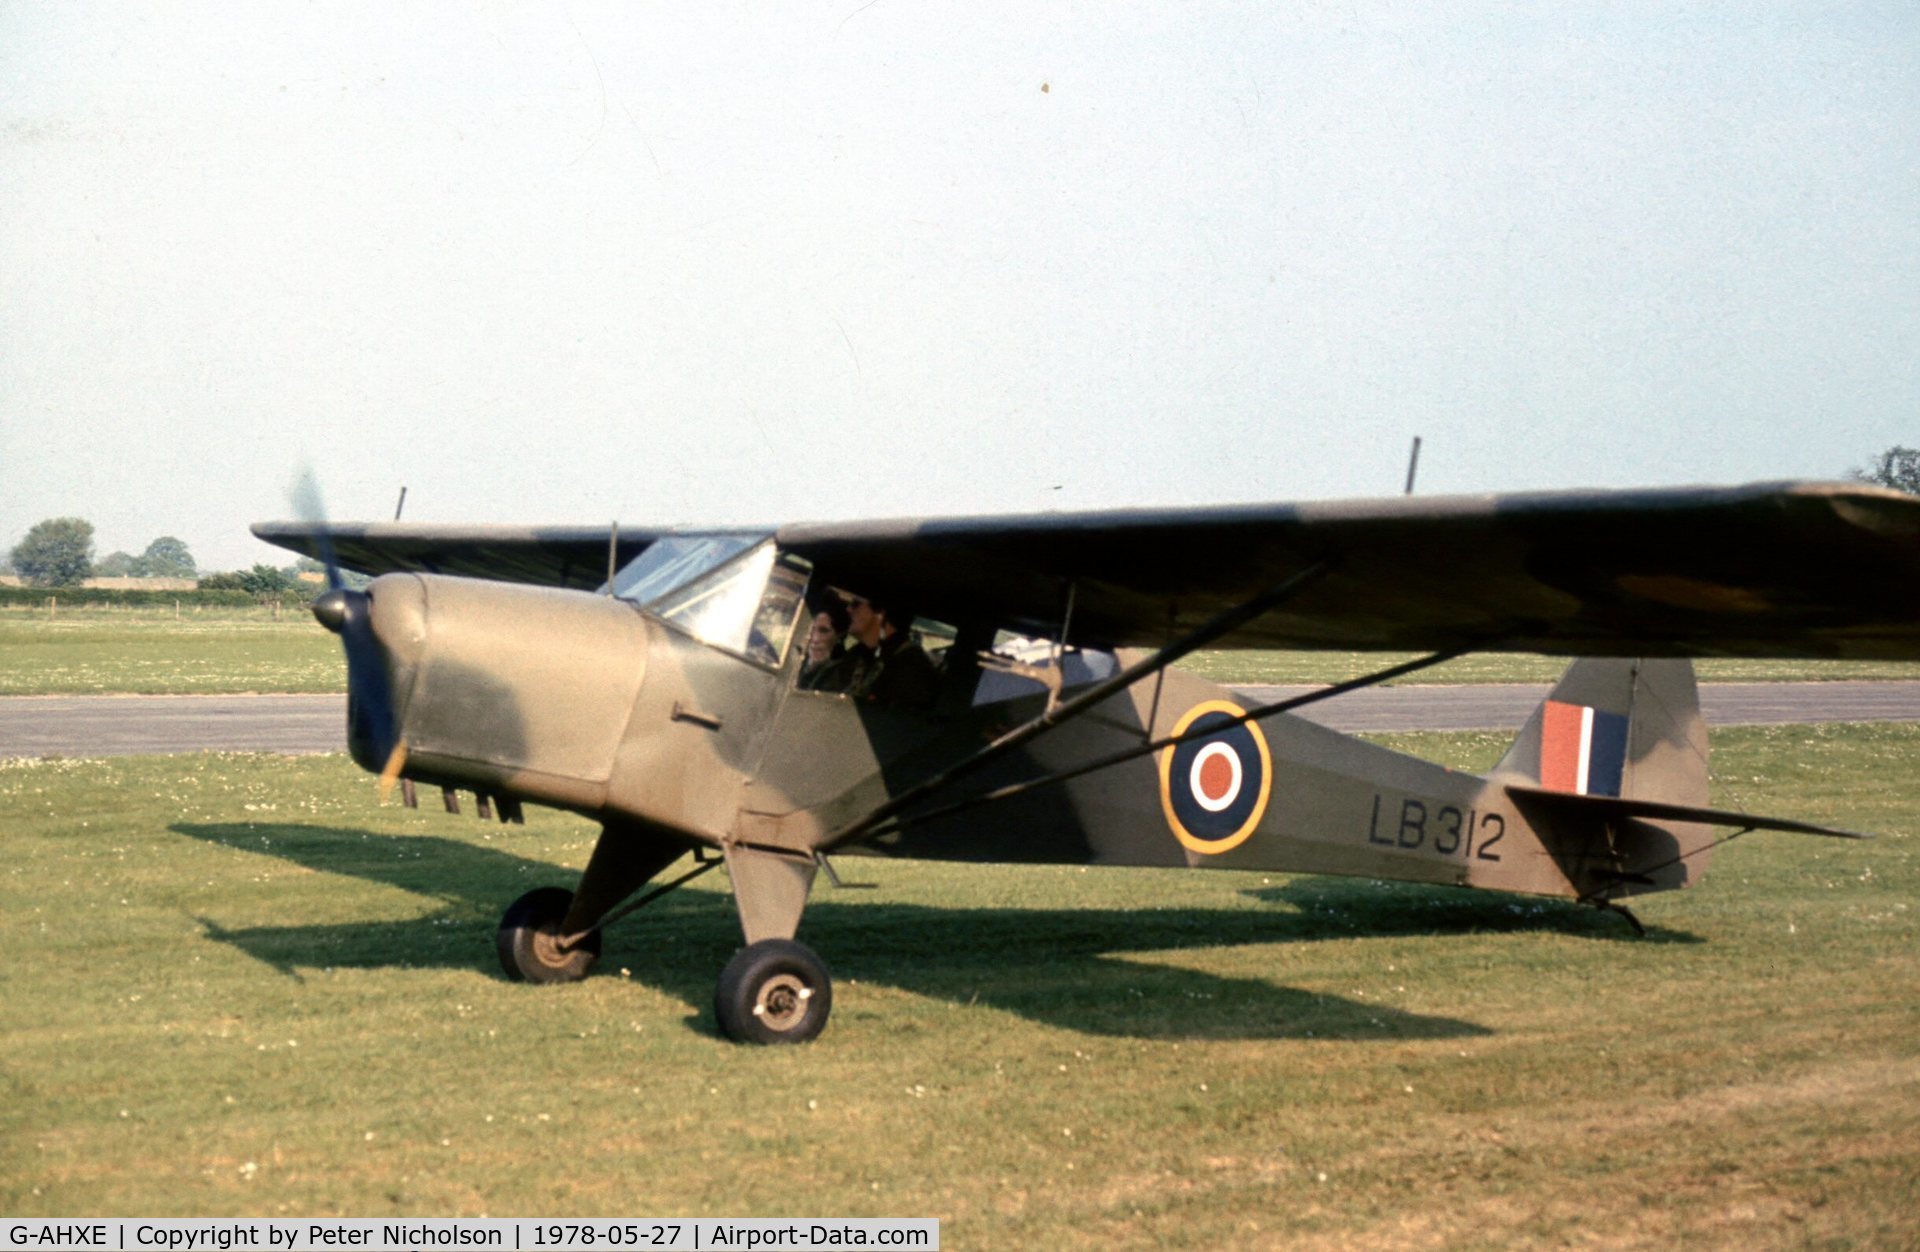 G-AHXE, 1942 Taylorcraft Auster Plus D C/N 171, Another view of the Taylorcraft at the 1978 Bassingbourn Air Show.